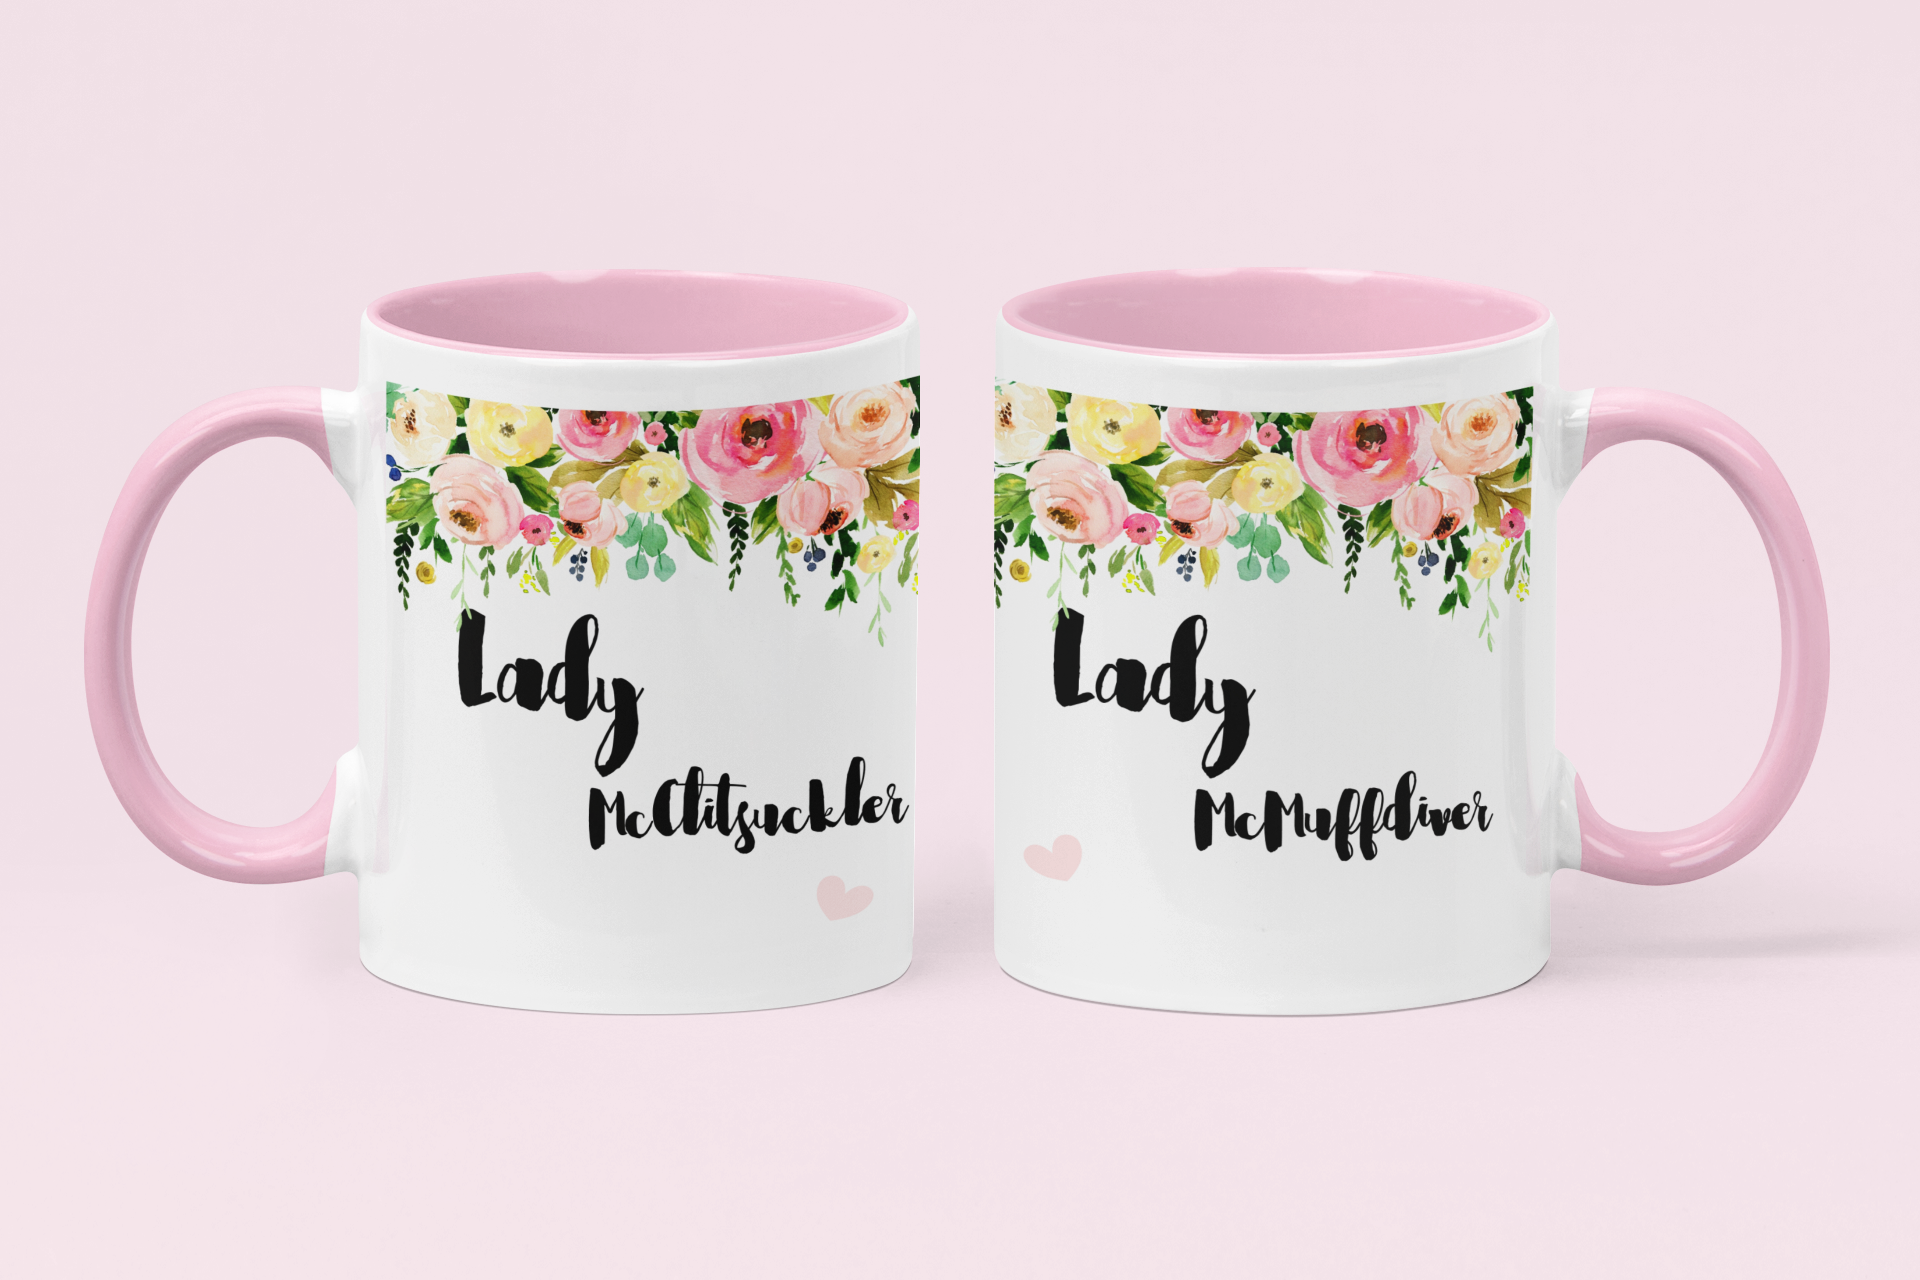 A pair of white mugs with pink handles & a colourful floral banner to the top. Under is the funny quotes ' lady mcclitsuckler' and 'lady mcmuffdiver'.